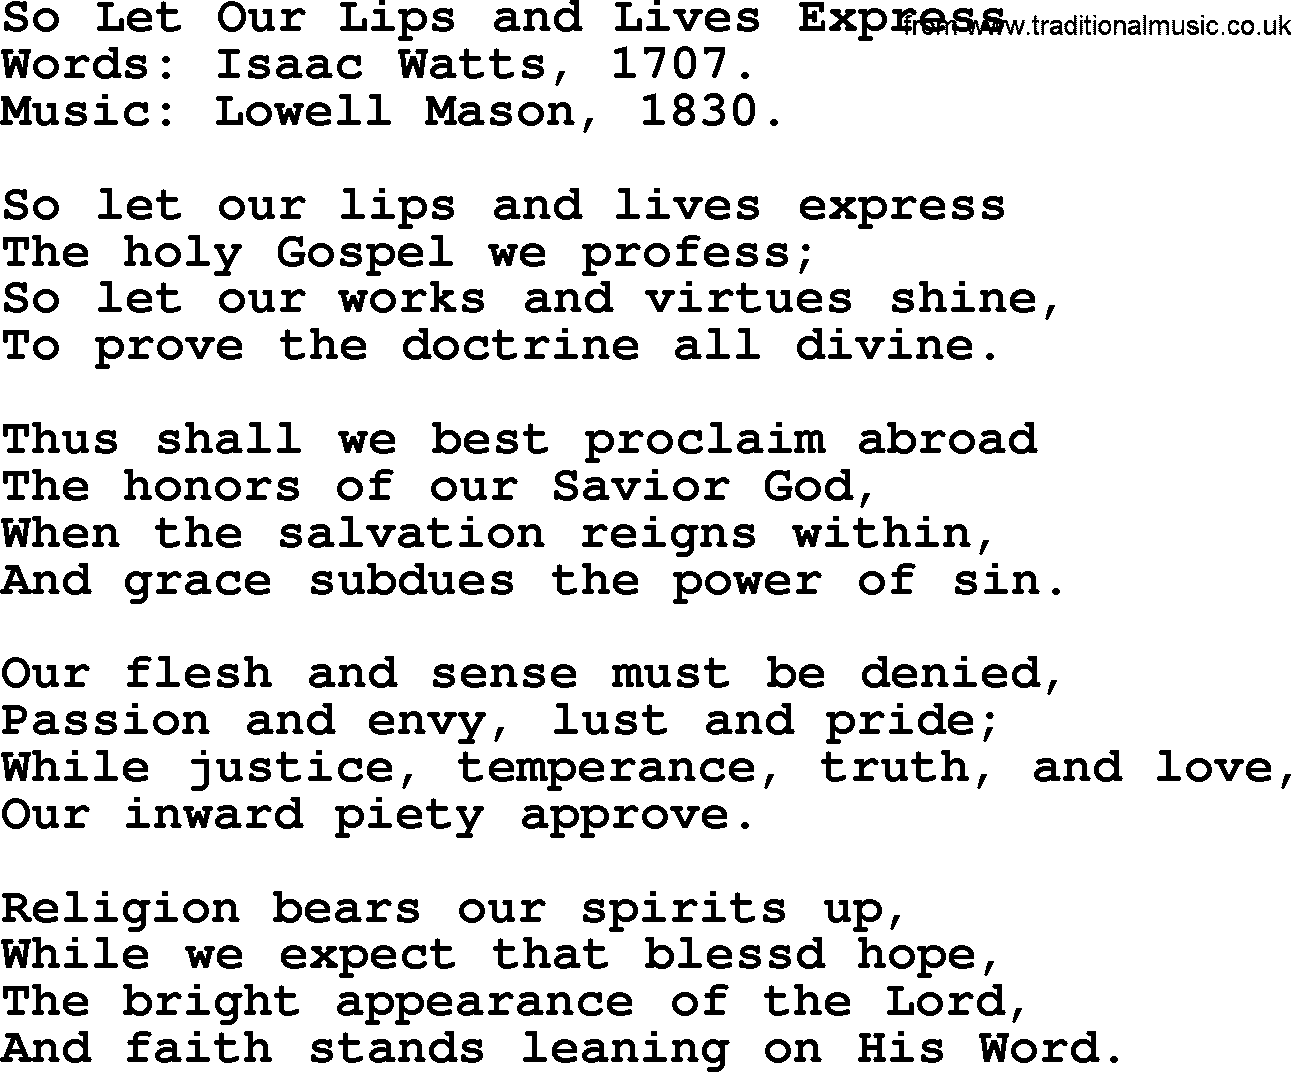 Isaac Watts Christian hymn: So Let Our Lips and Lives Express- lyricss